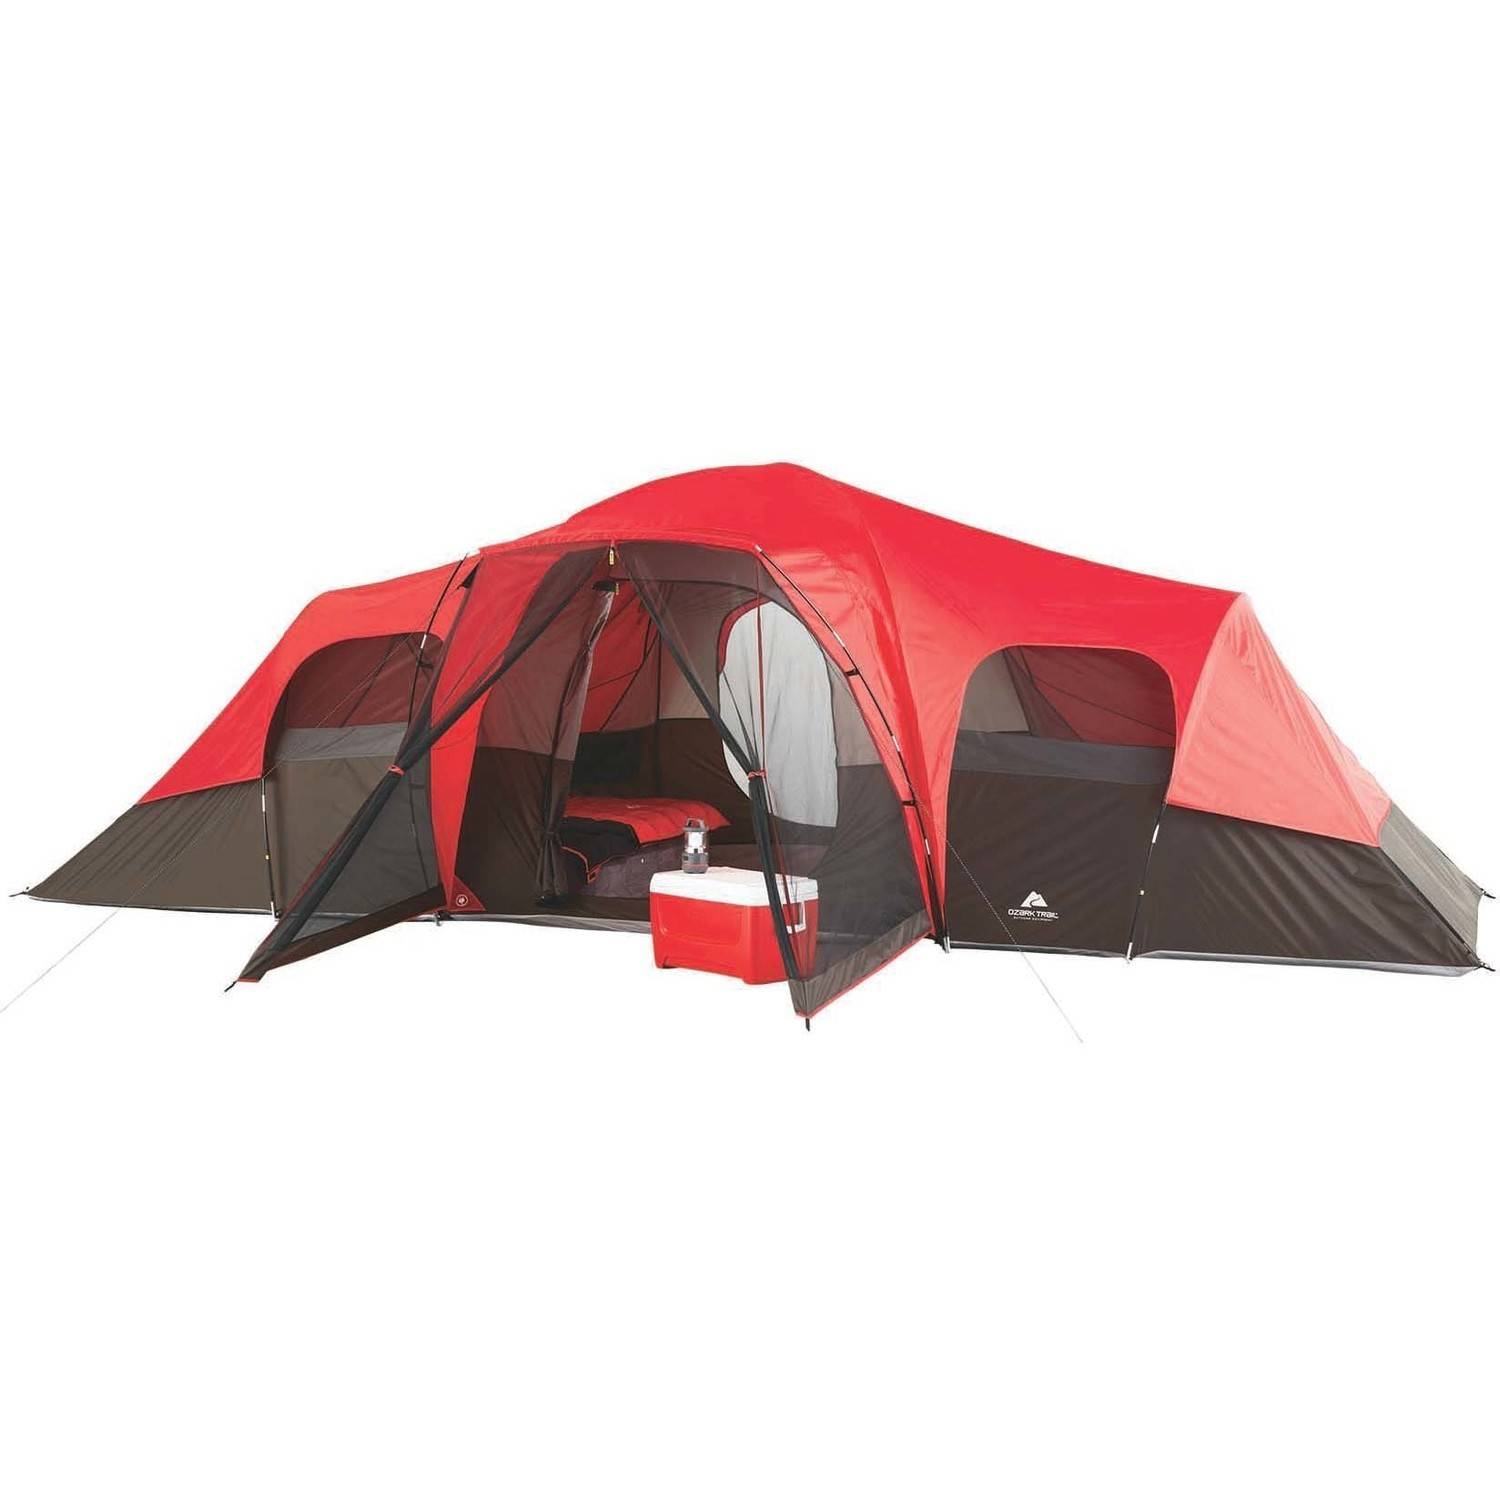 Ozark Trail, 21' x 15' 10-Person Family Camping Tent - image 1 of 11